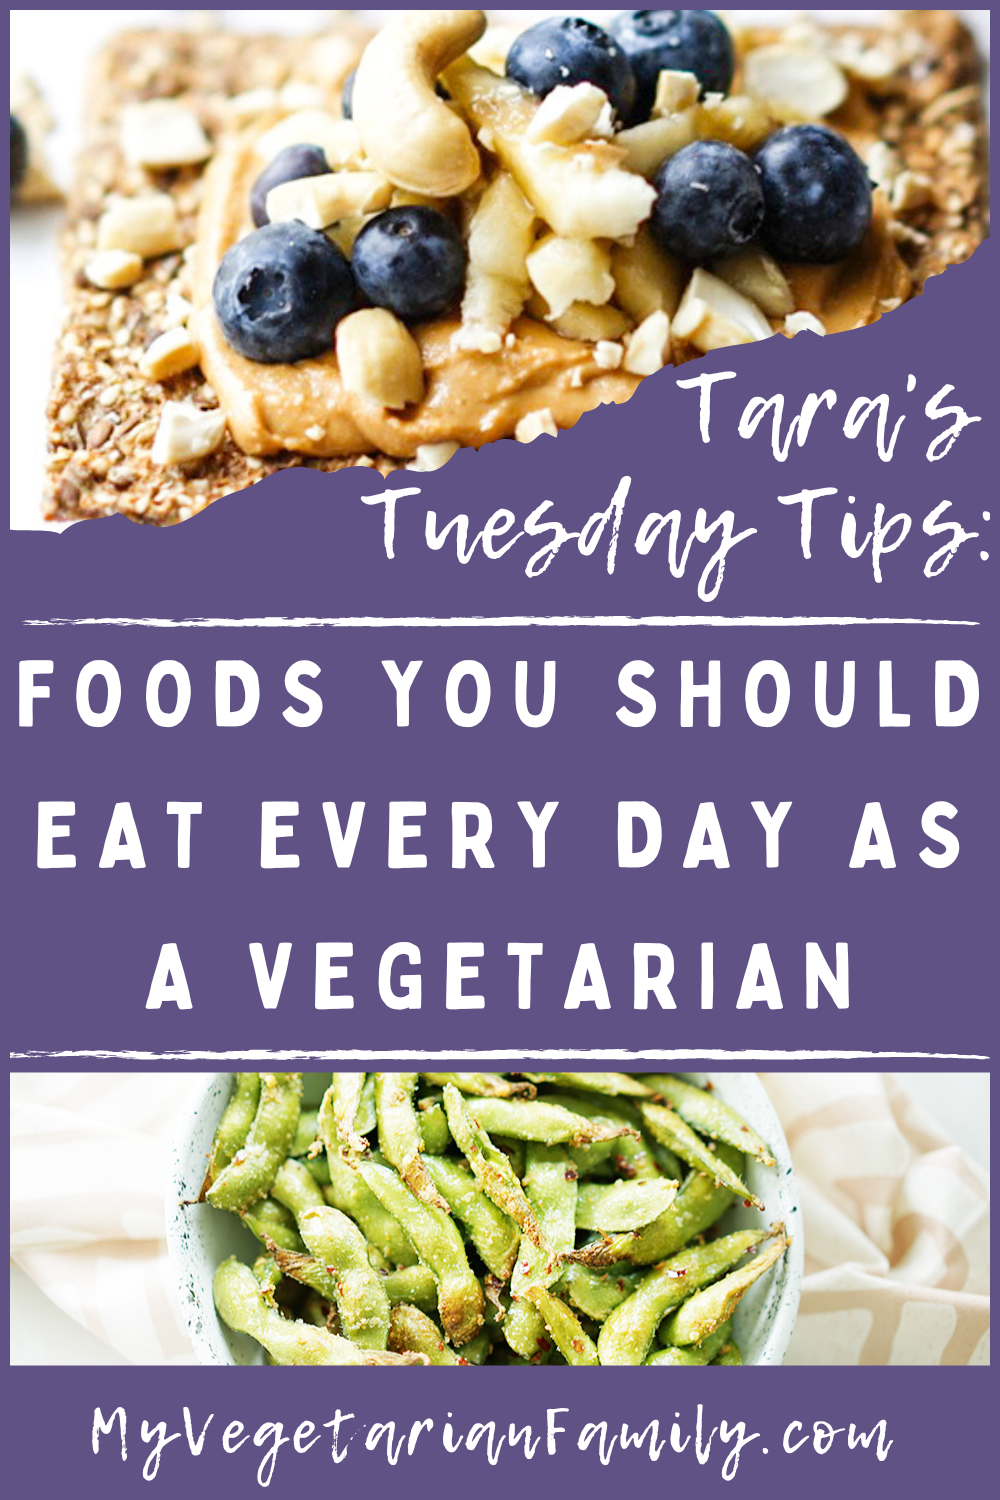 Foods You Should Eat Every Day as a Vegetarian | Tara's Tuesday Tips| My Vegetarian Family #nutritiontips #vegetarianstaples